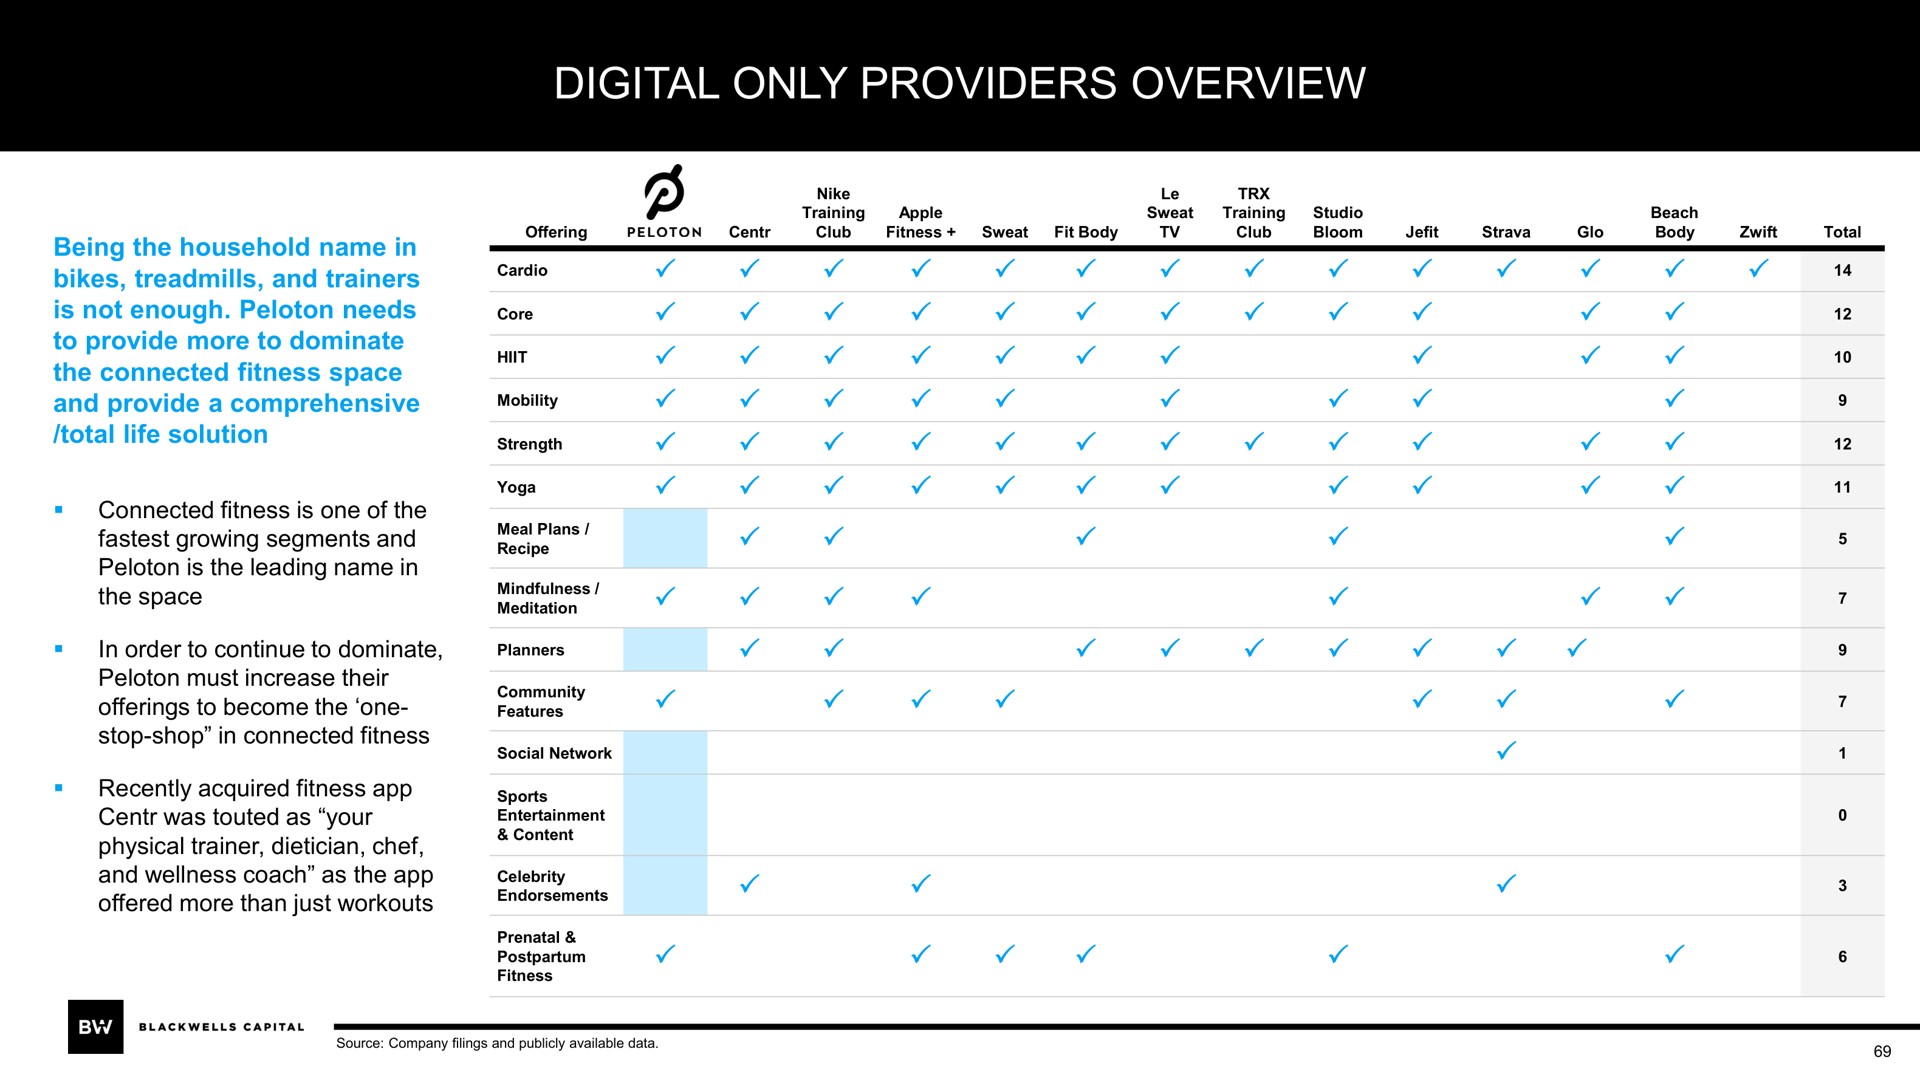 digital only providers overview | Blackwells Capital